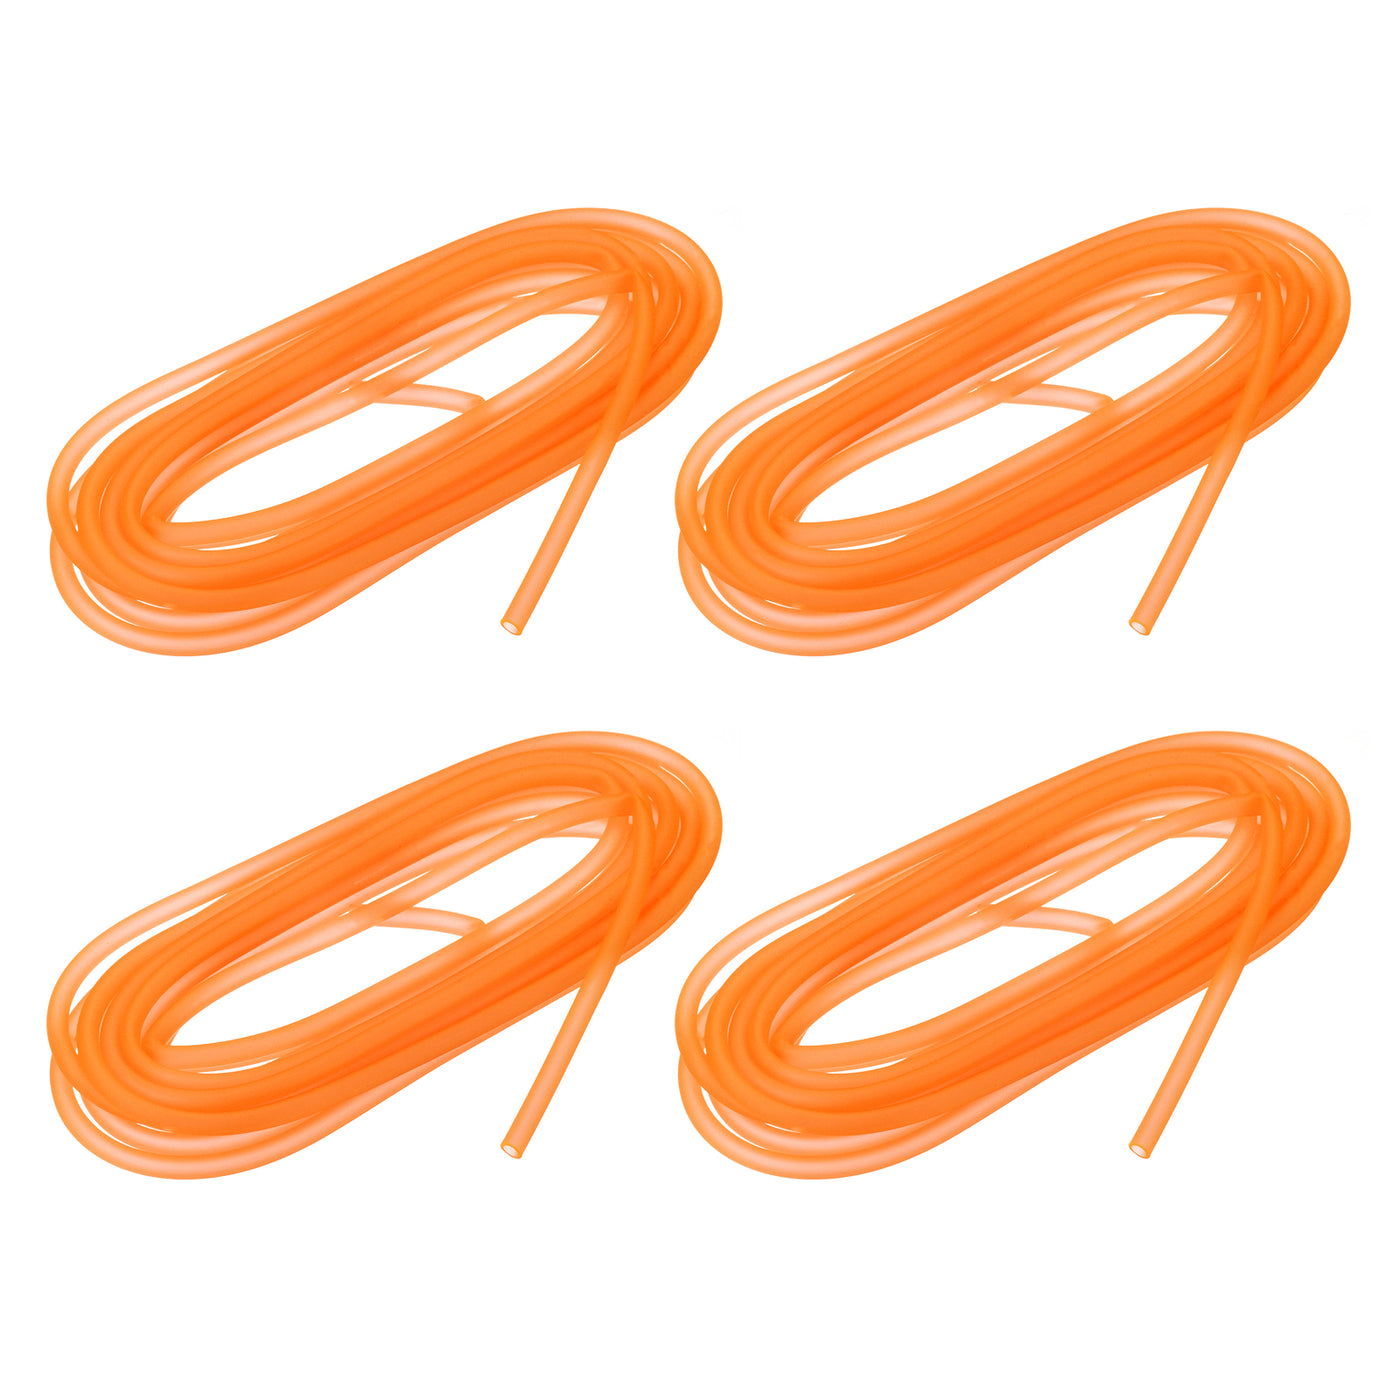 uxcell Uxcell Silicone Tubing 5/32" ID, 15/64" OD 4Pcs 13.12 Ft for Pump Transfer, Orange